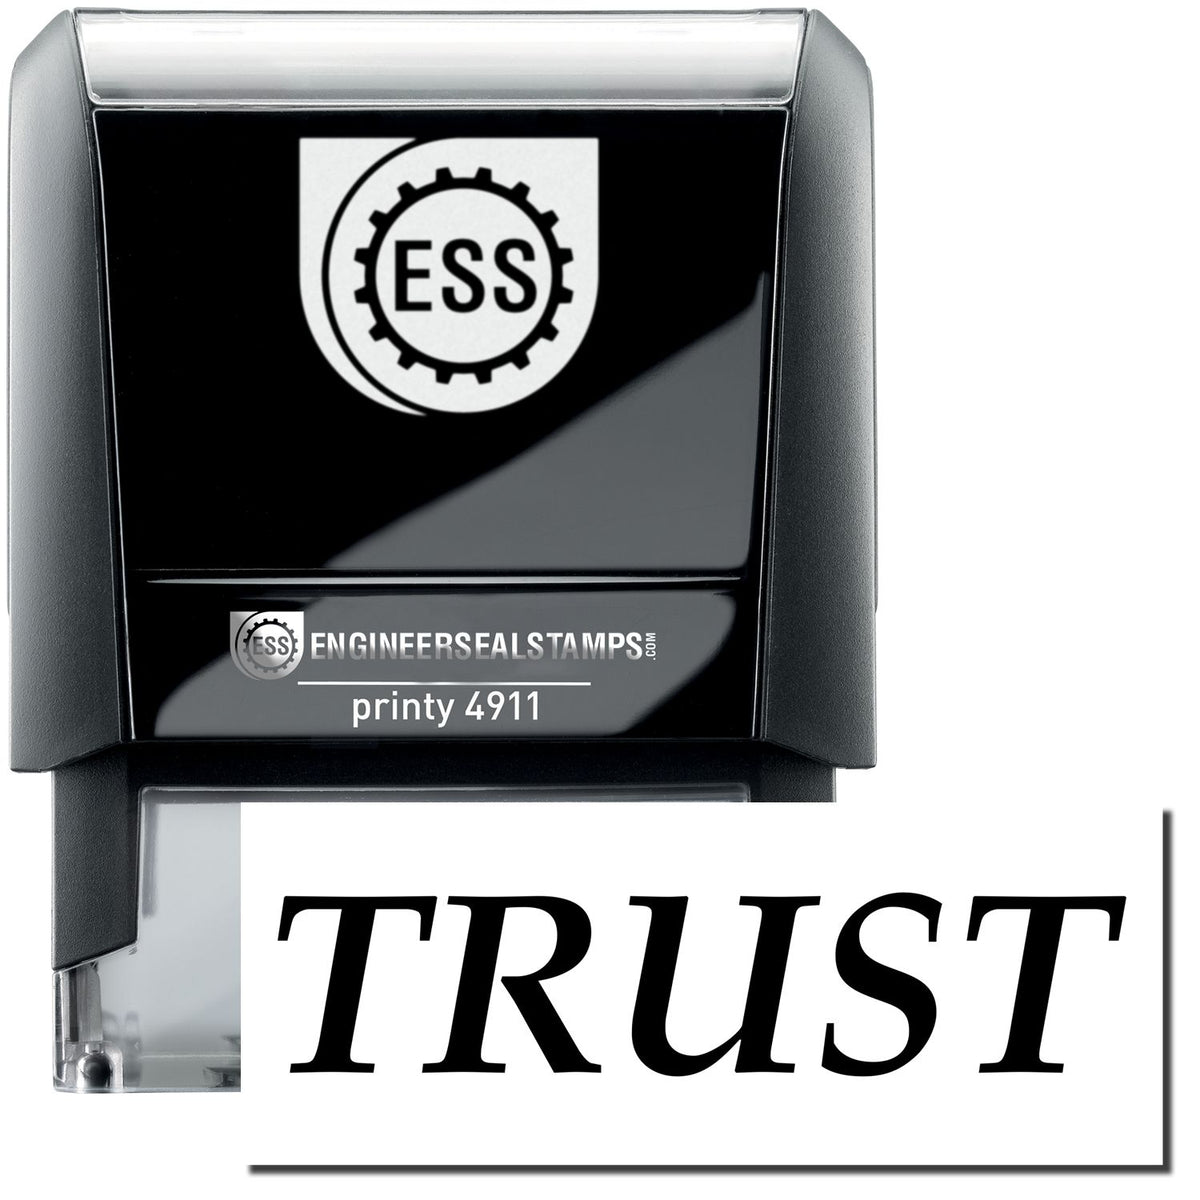 A self-inking stamp with a stamped image showing how the text &quot;TRUST&quot; is displayed after stamping.